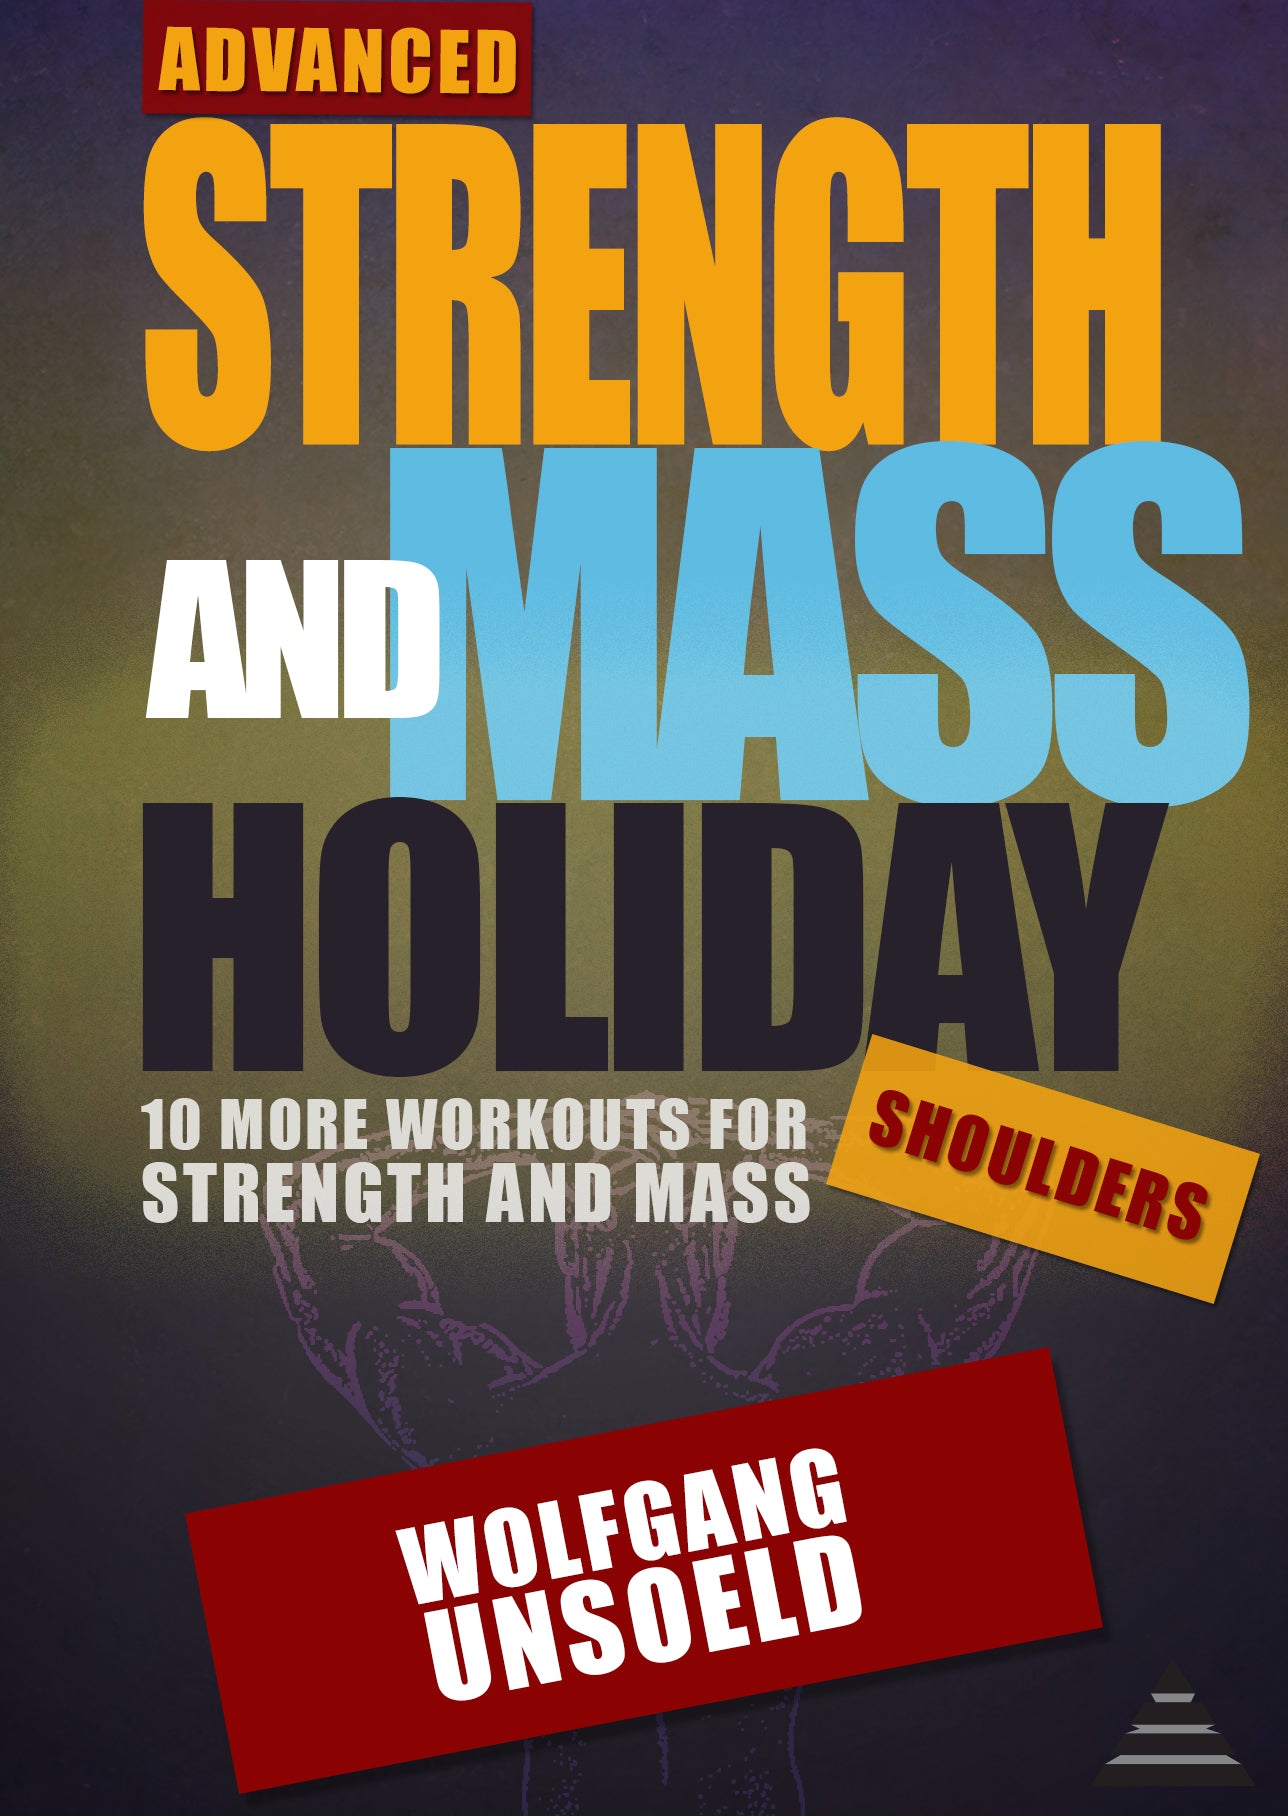 eBook & Videos - Advanced Strength and Mass Holiday